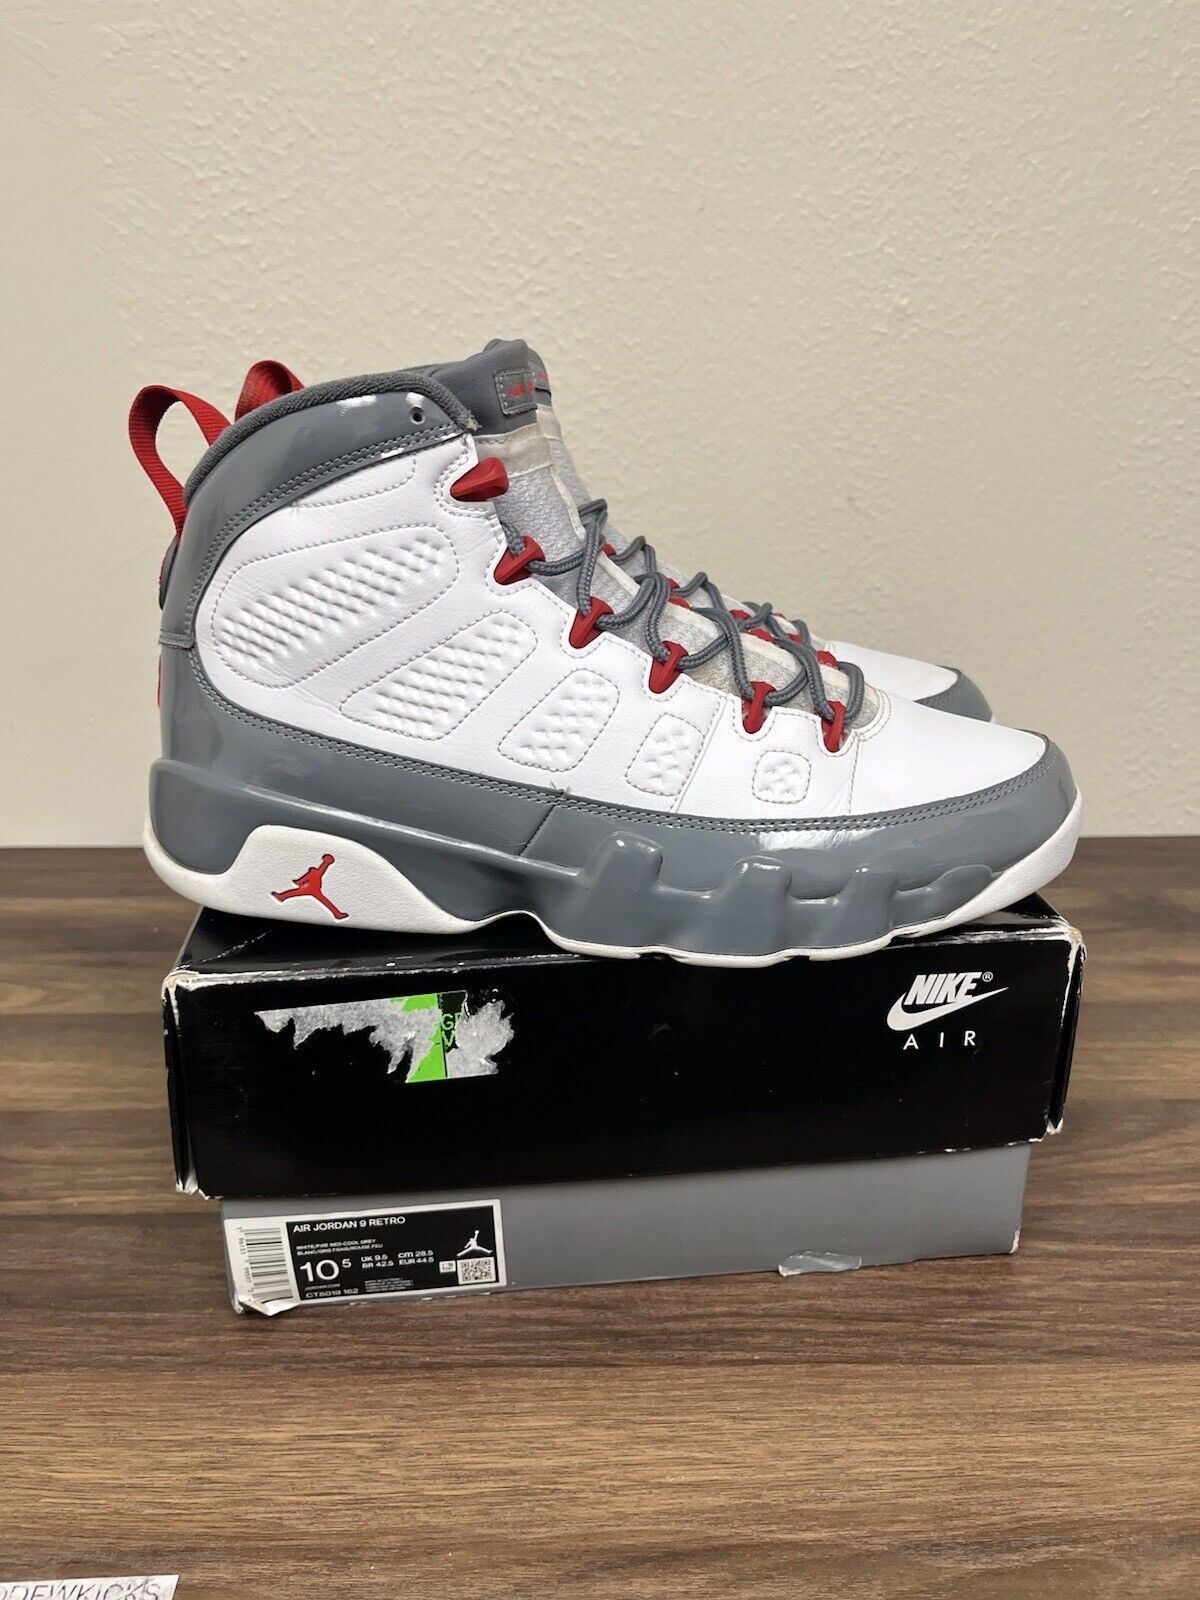 Size 10.5 - Air Jordan 9 Retro Mid Fire Red 100% Authentic